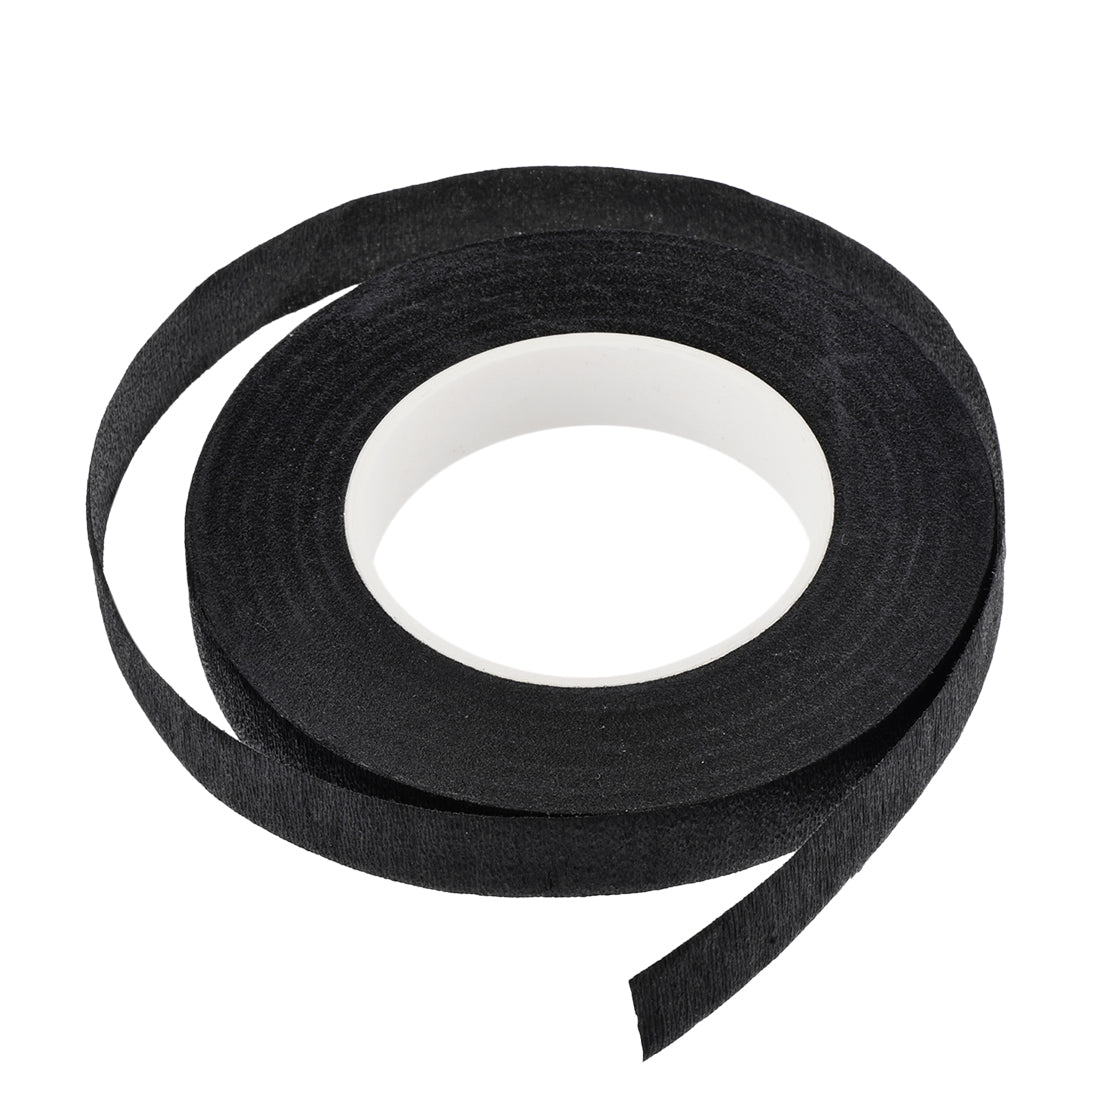 uxcell Uxcell 1Roll 1/2"x30Yard Black Floral Tape Flower Adhesives Floral Arrangement Kit